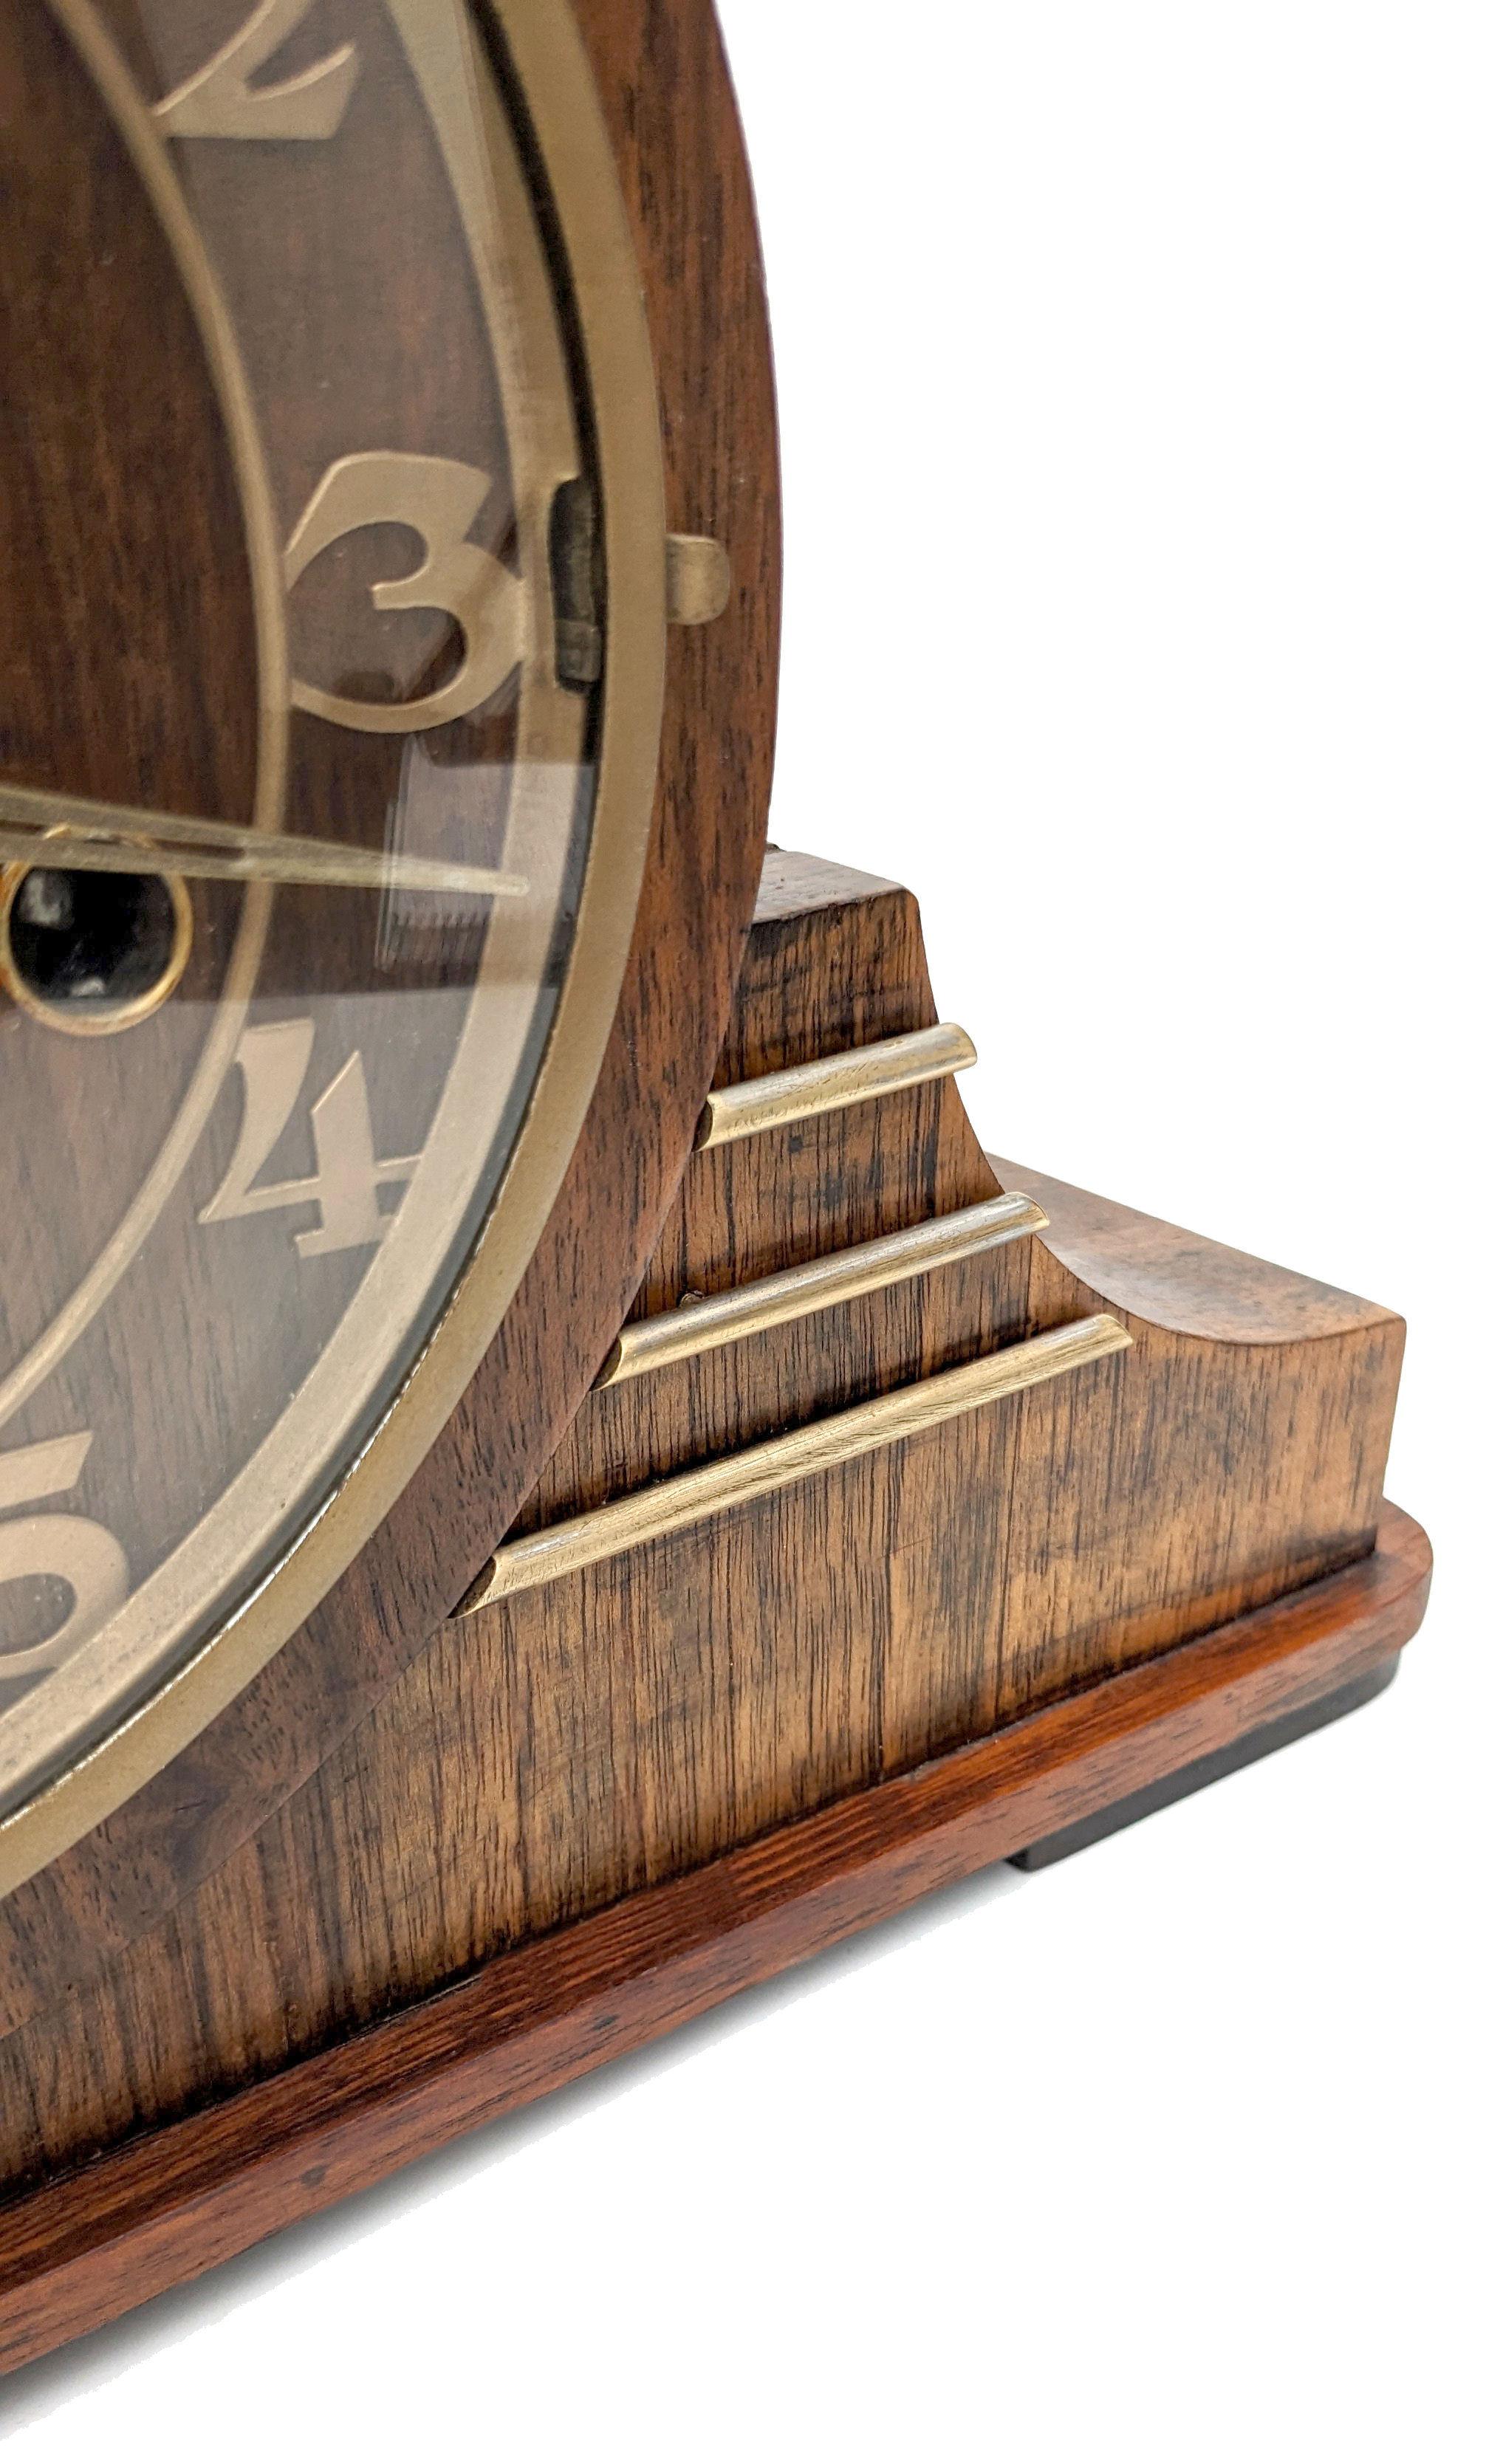 For your consideration is this very stylish 1930's Art Deco mantle clock made in Germany by clockmakers Haller . Full working order - serviced, tested and calibrated by a qualified horologist. Fabulous rare asymmetric case in straight grain walnut